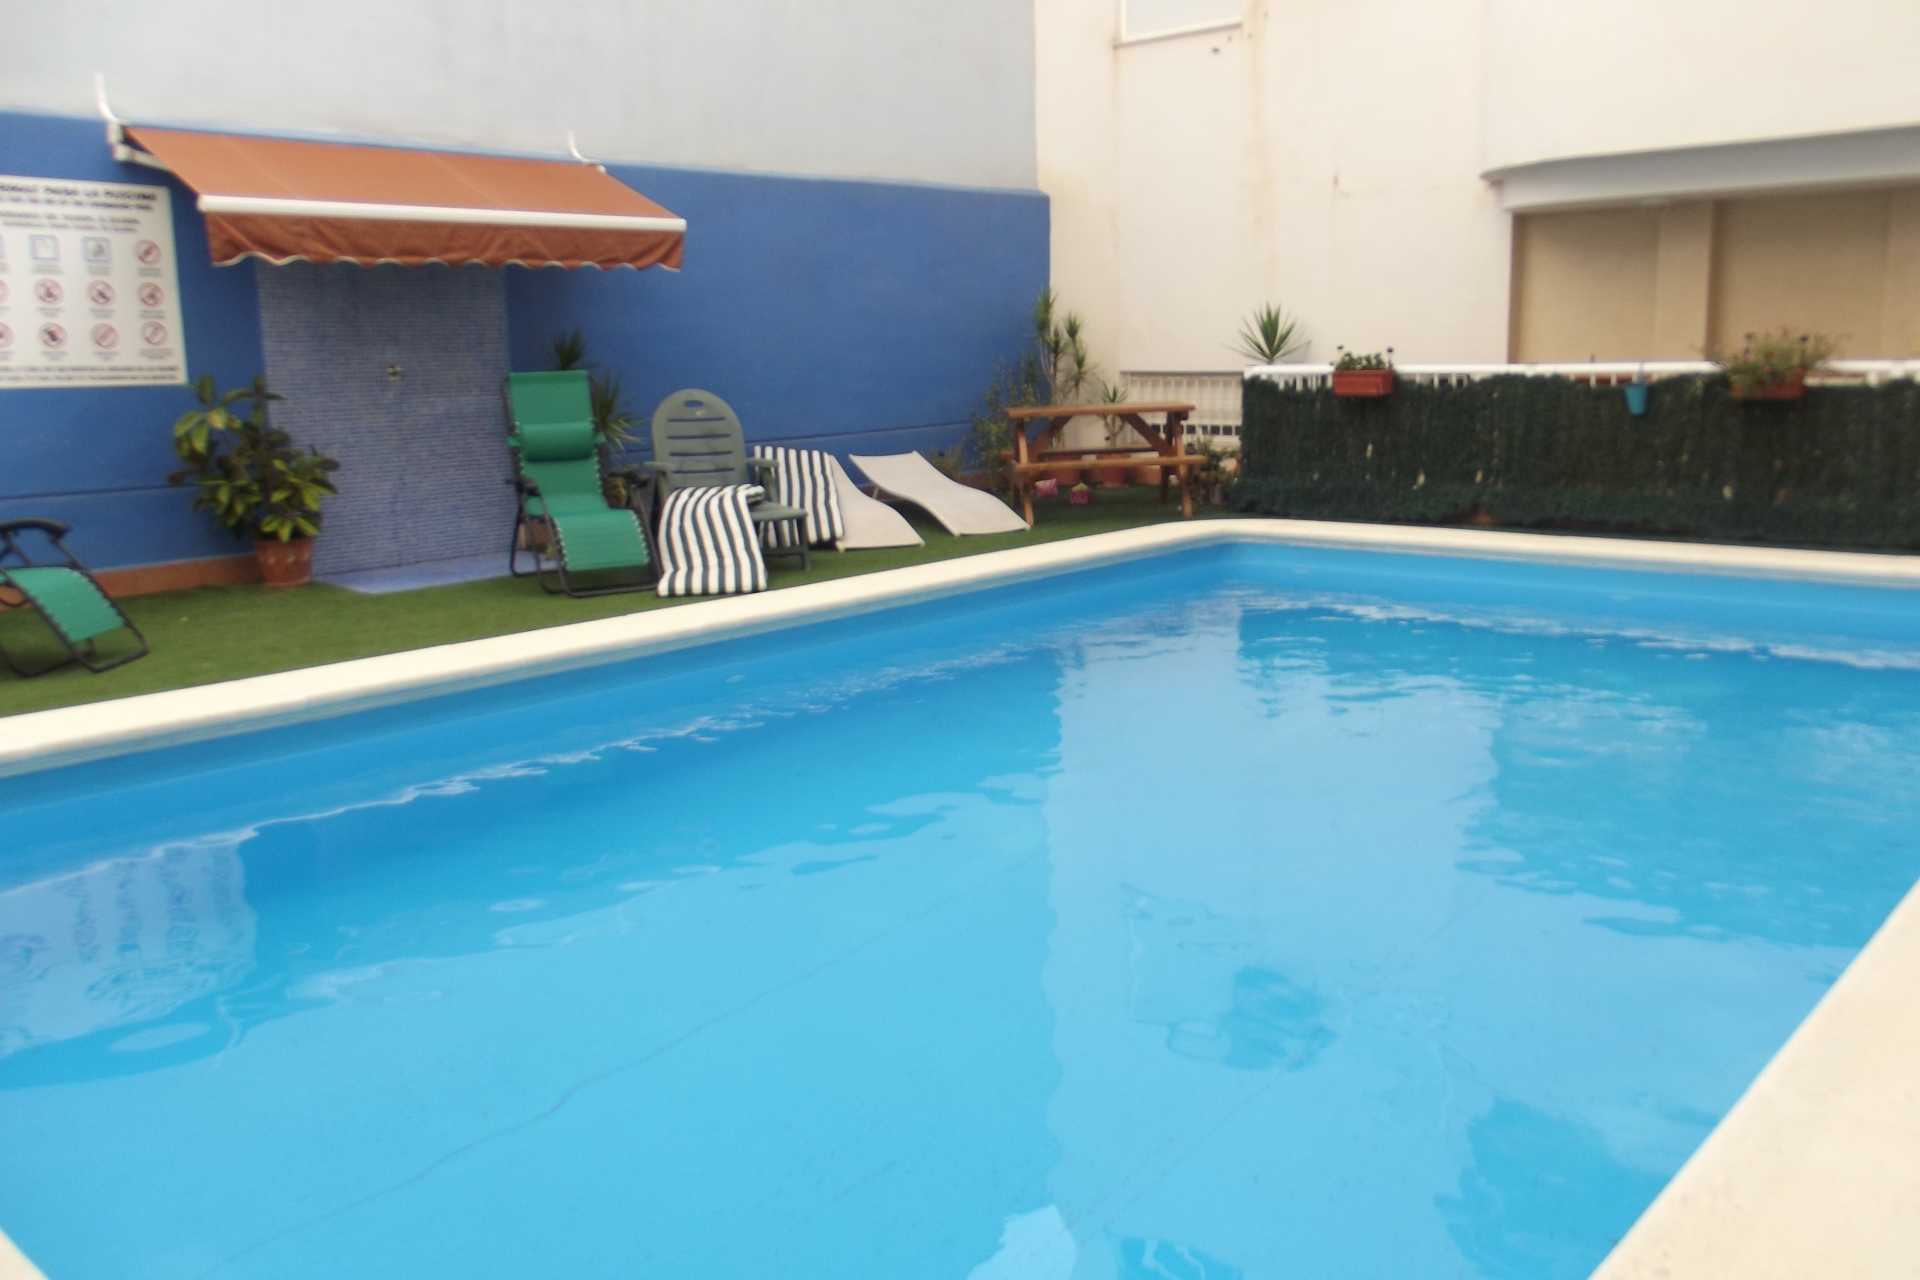 Property on Hold - Apartment for sale - Los Montesinos